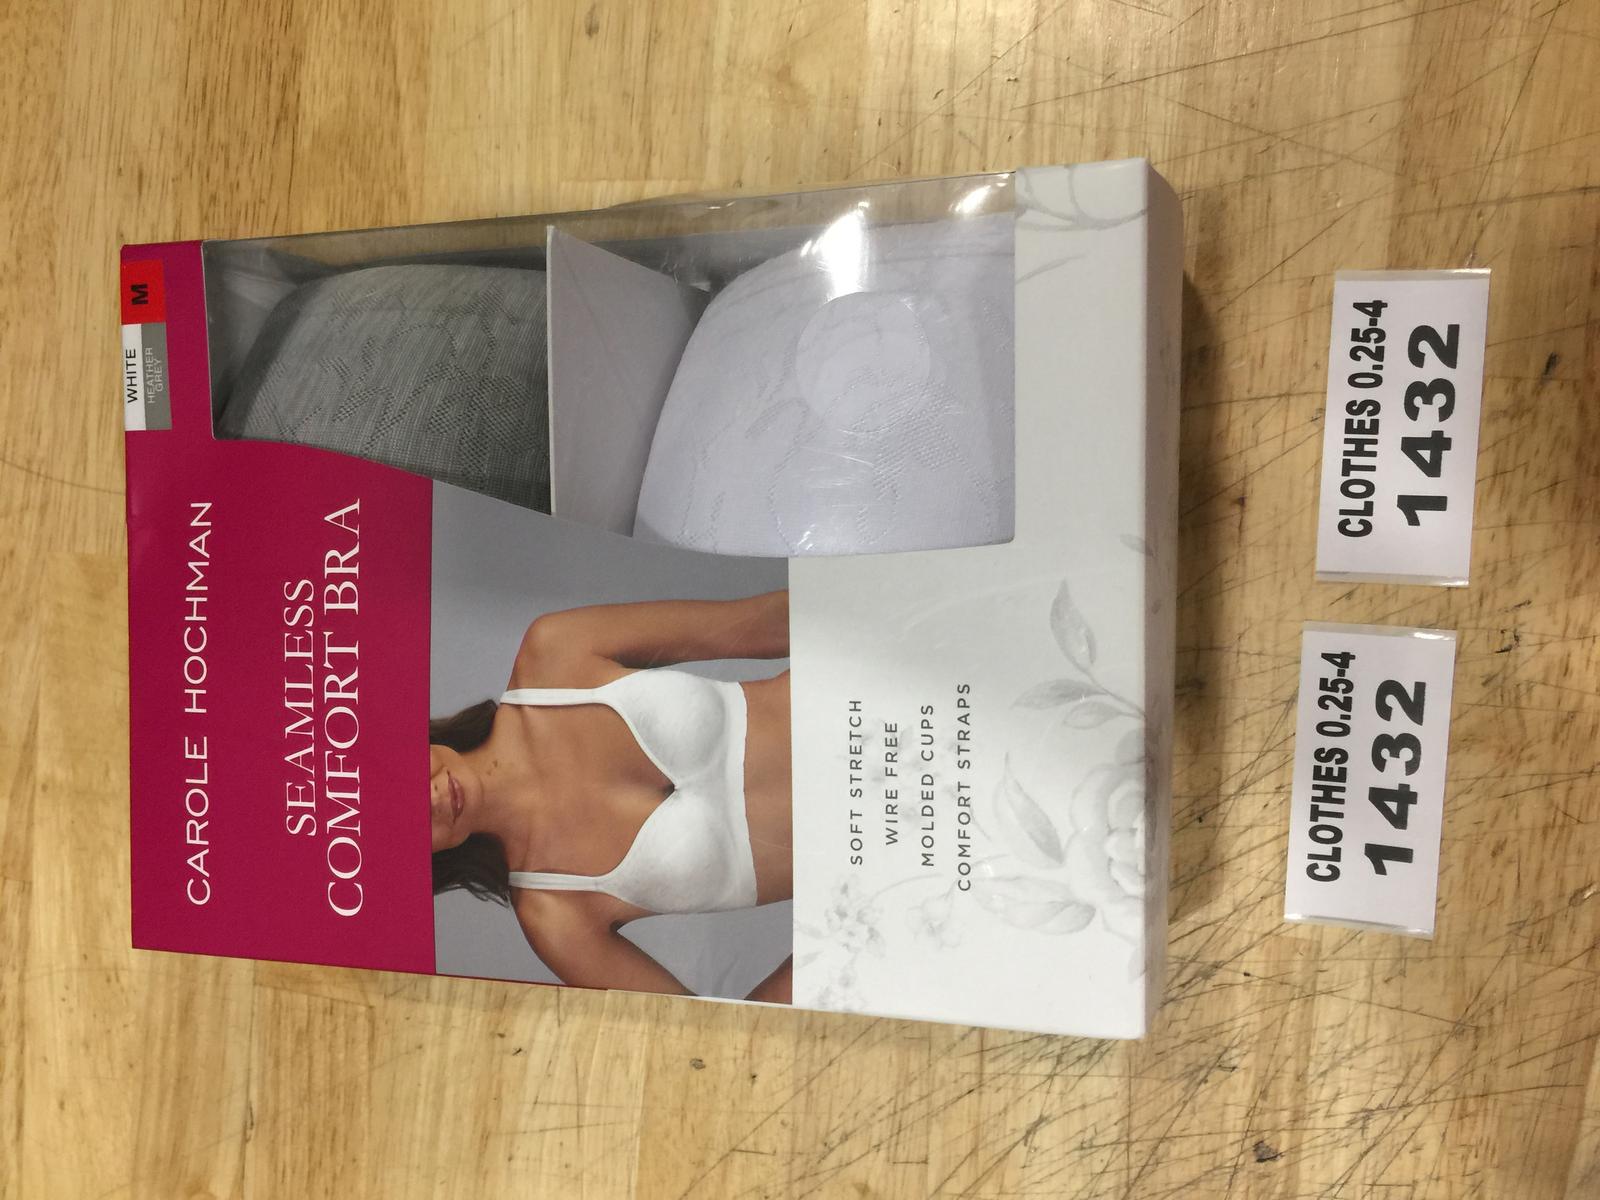 Carole Hochman Seamless Comfort Bra Wire Free Molded Cups Comfort Straps (2  Pack)